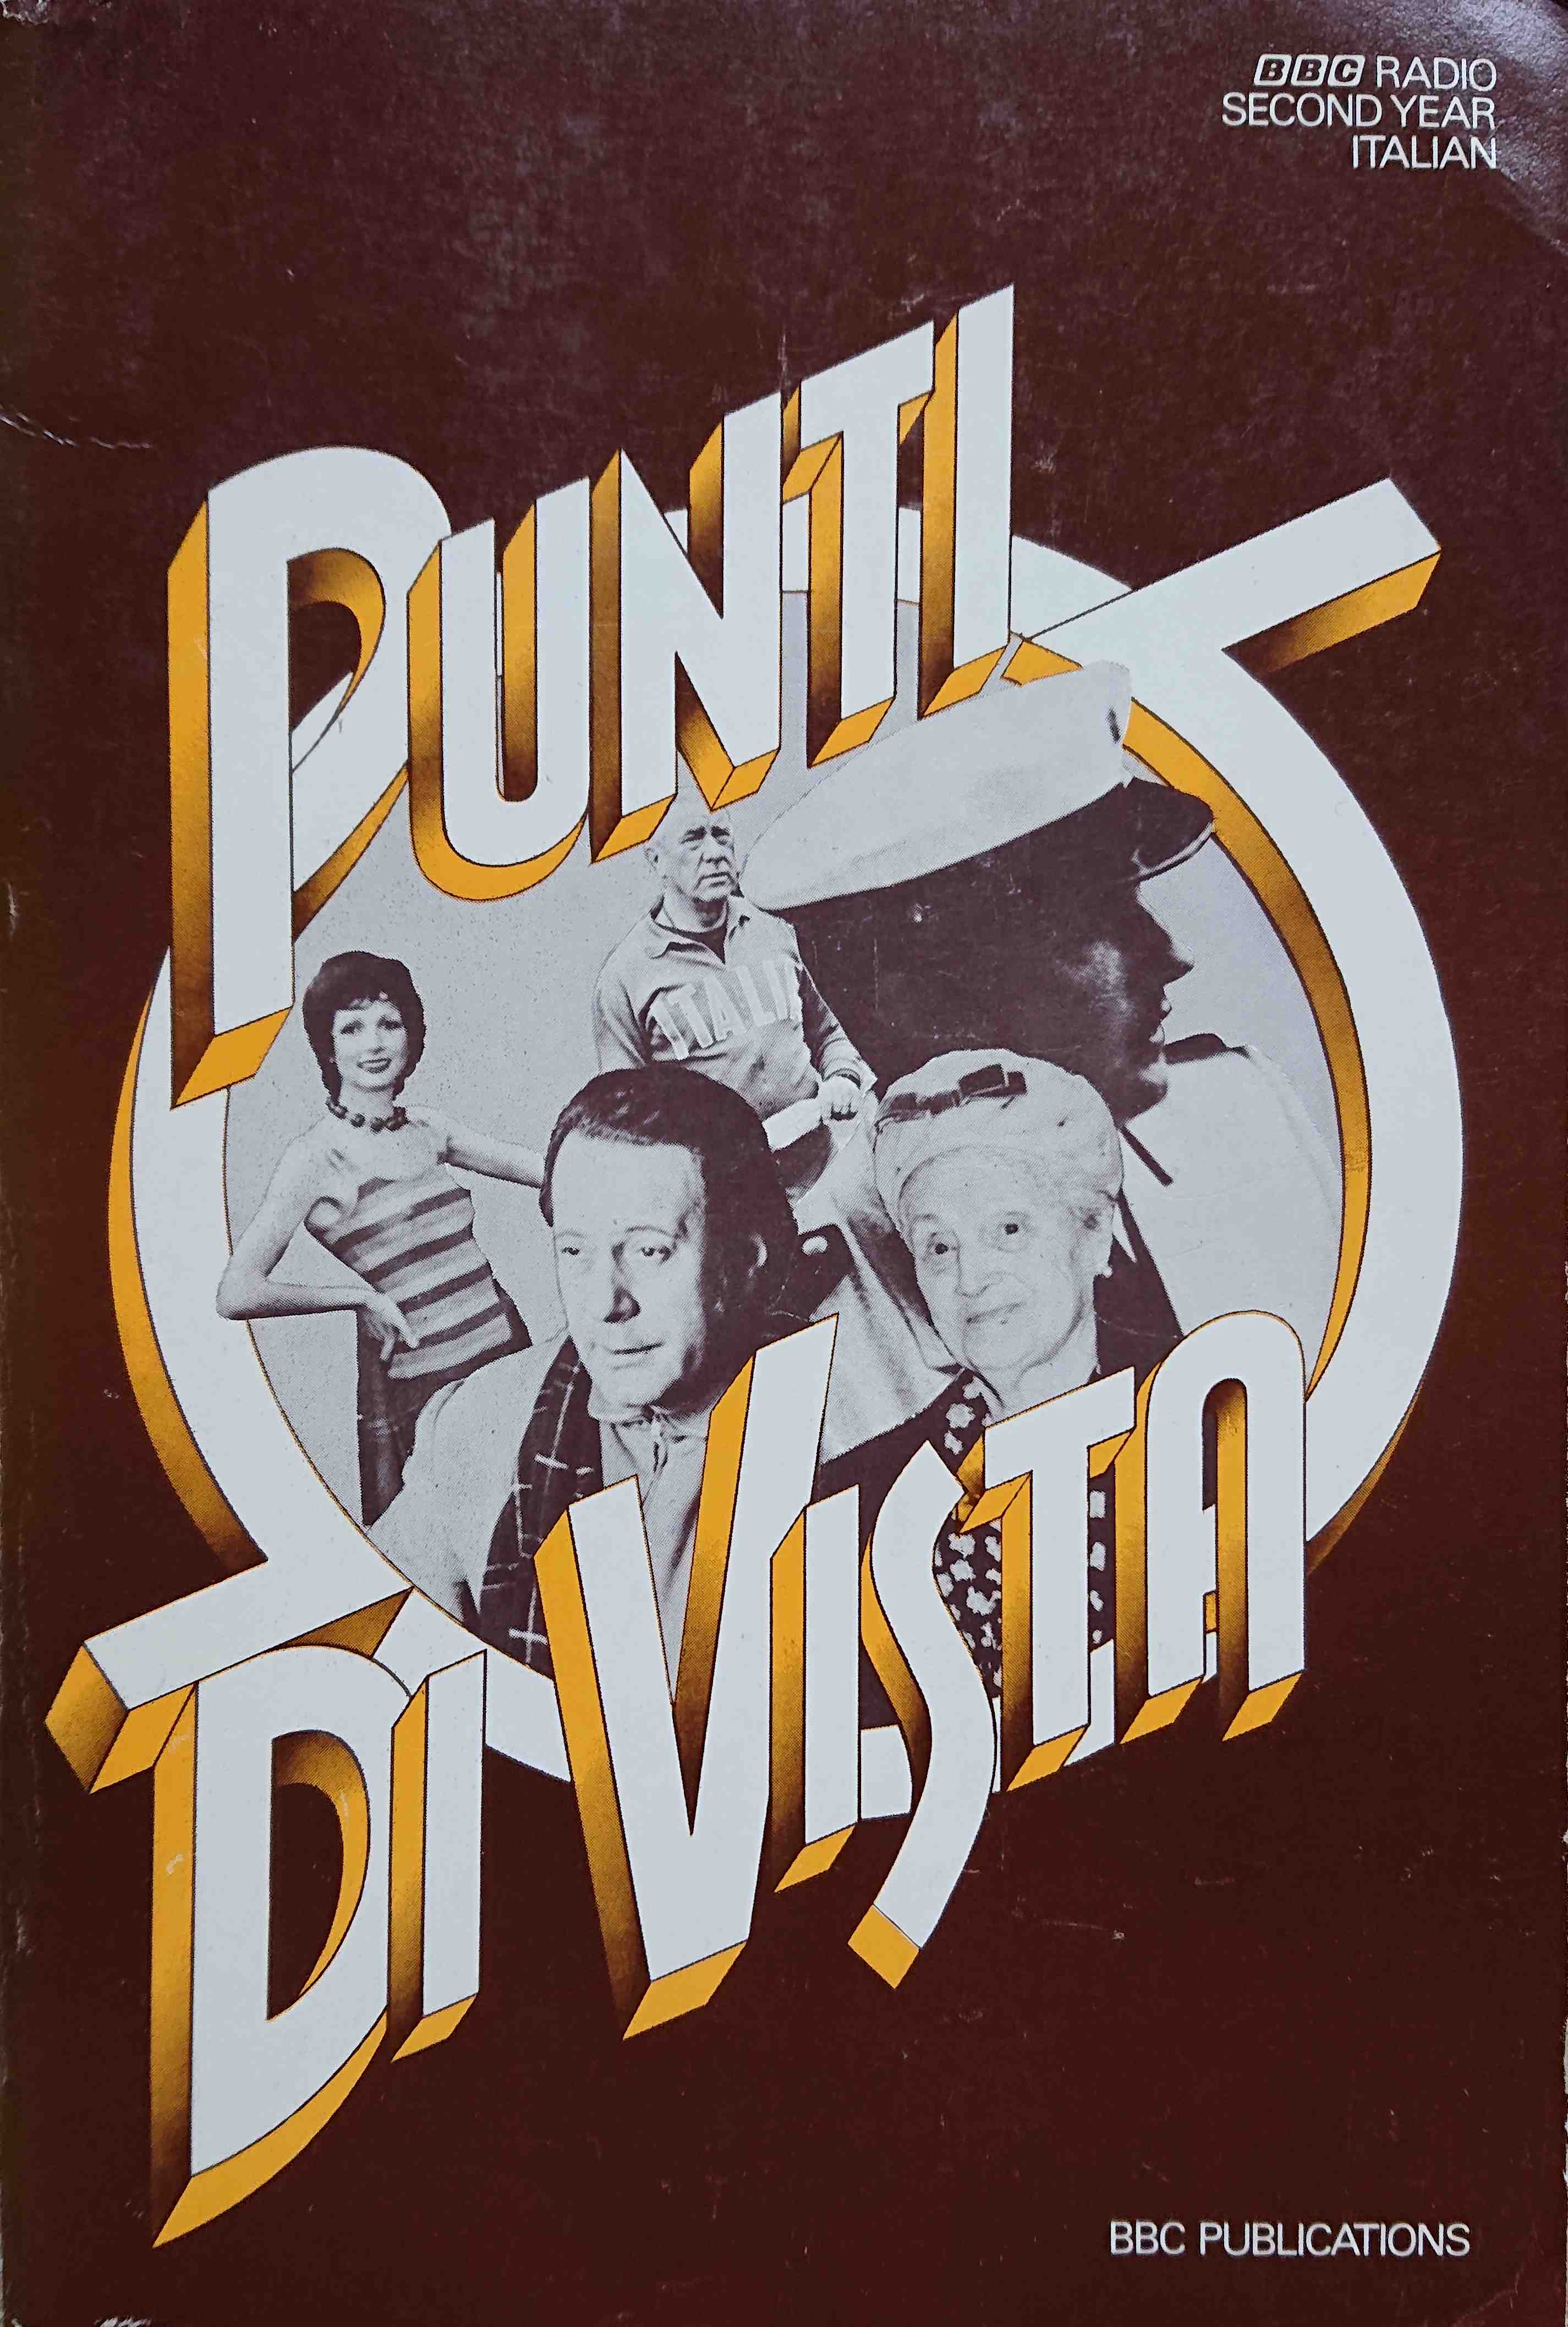 Picture of Punti di vista by artist John Insole from the BBC books - Records and Tapes library